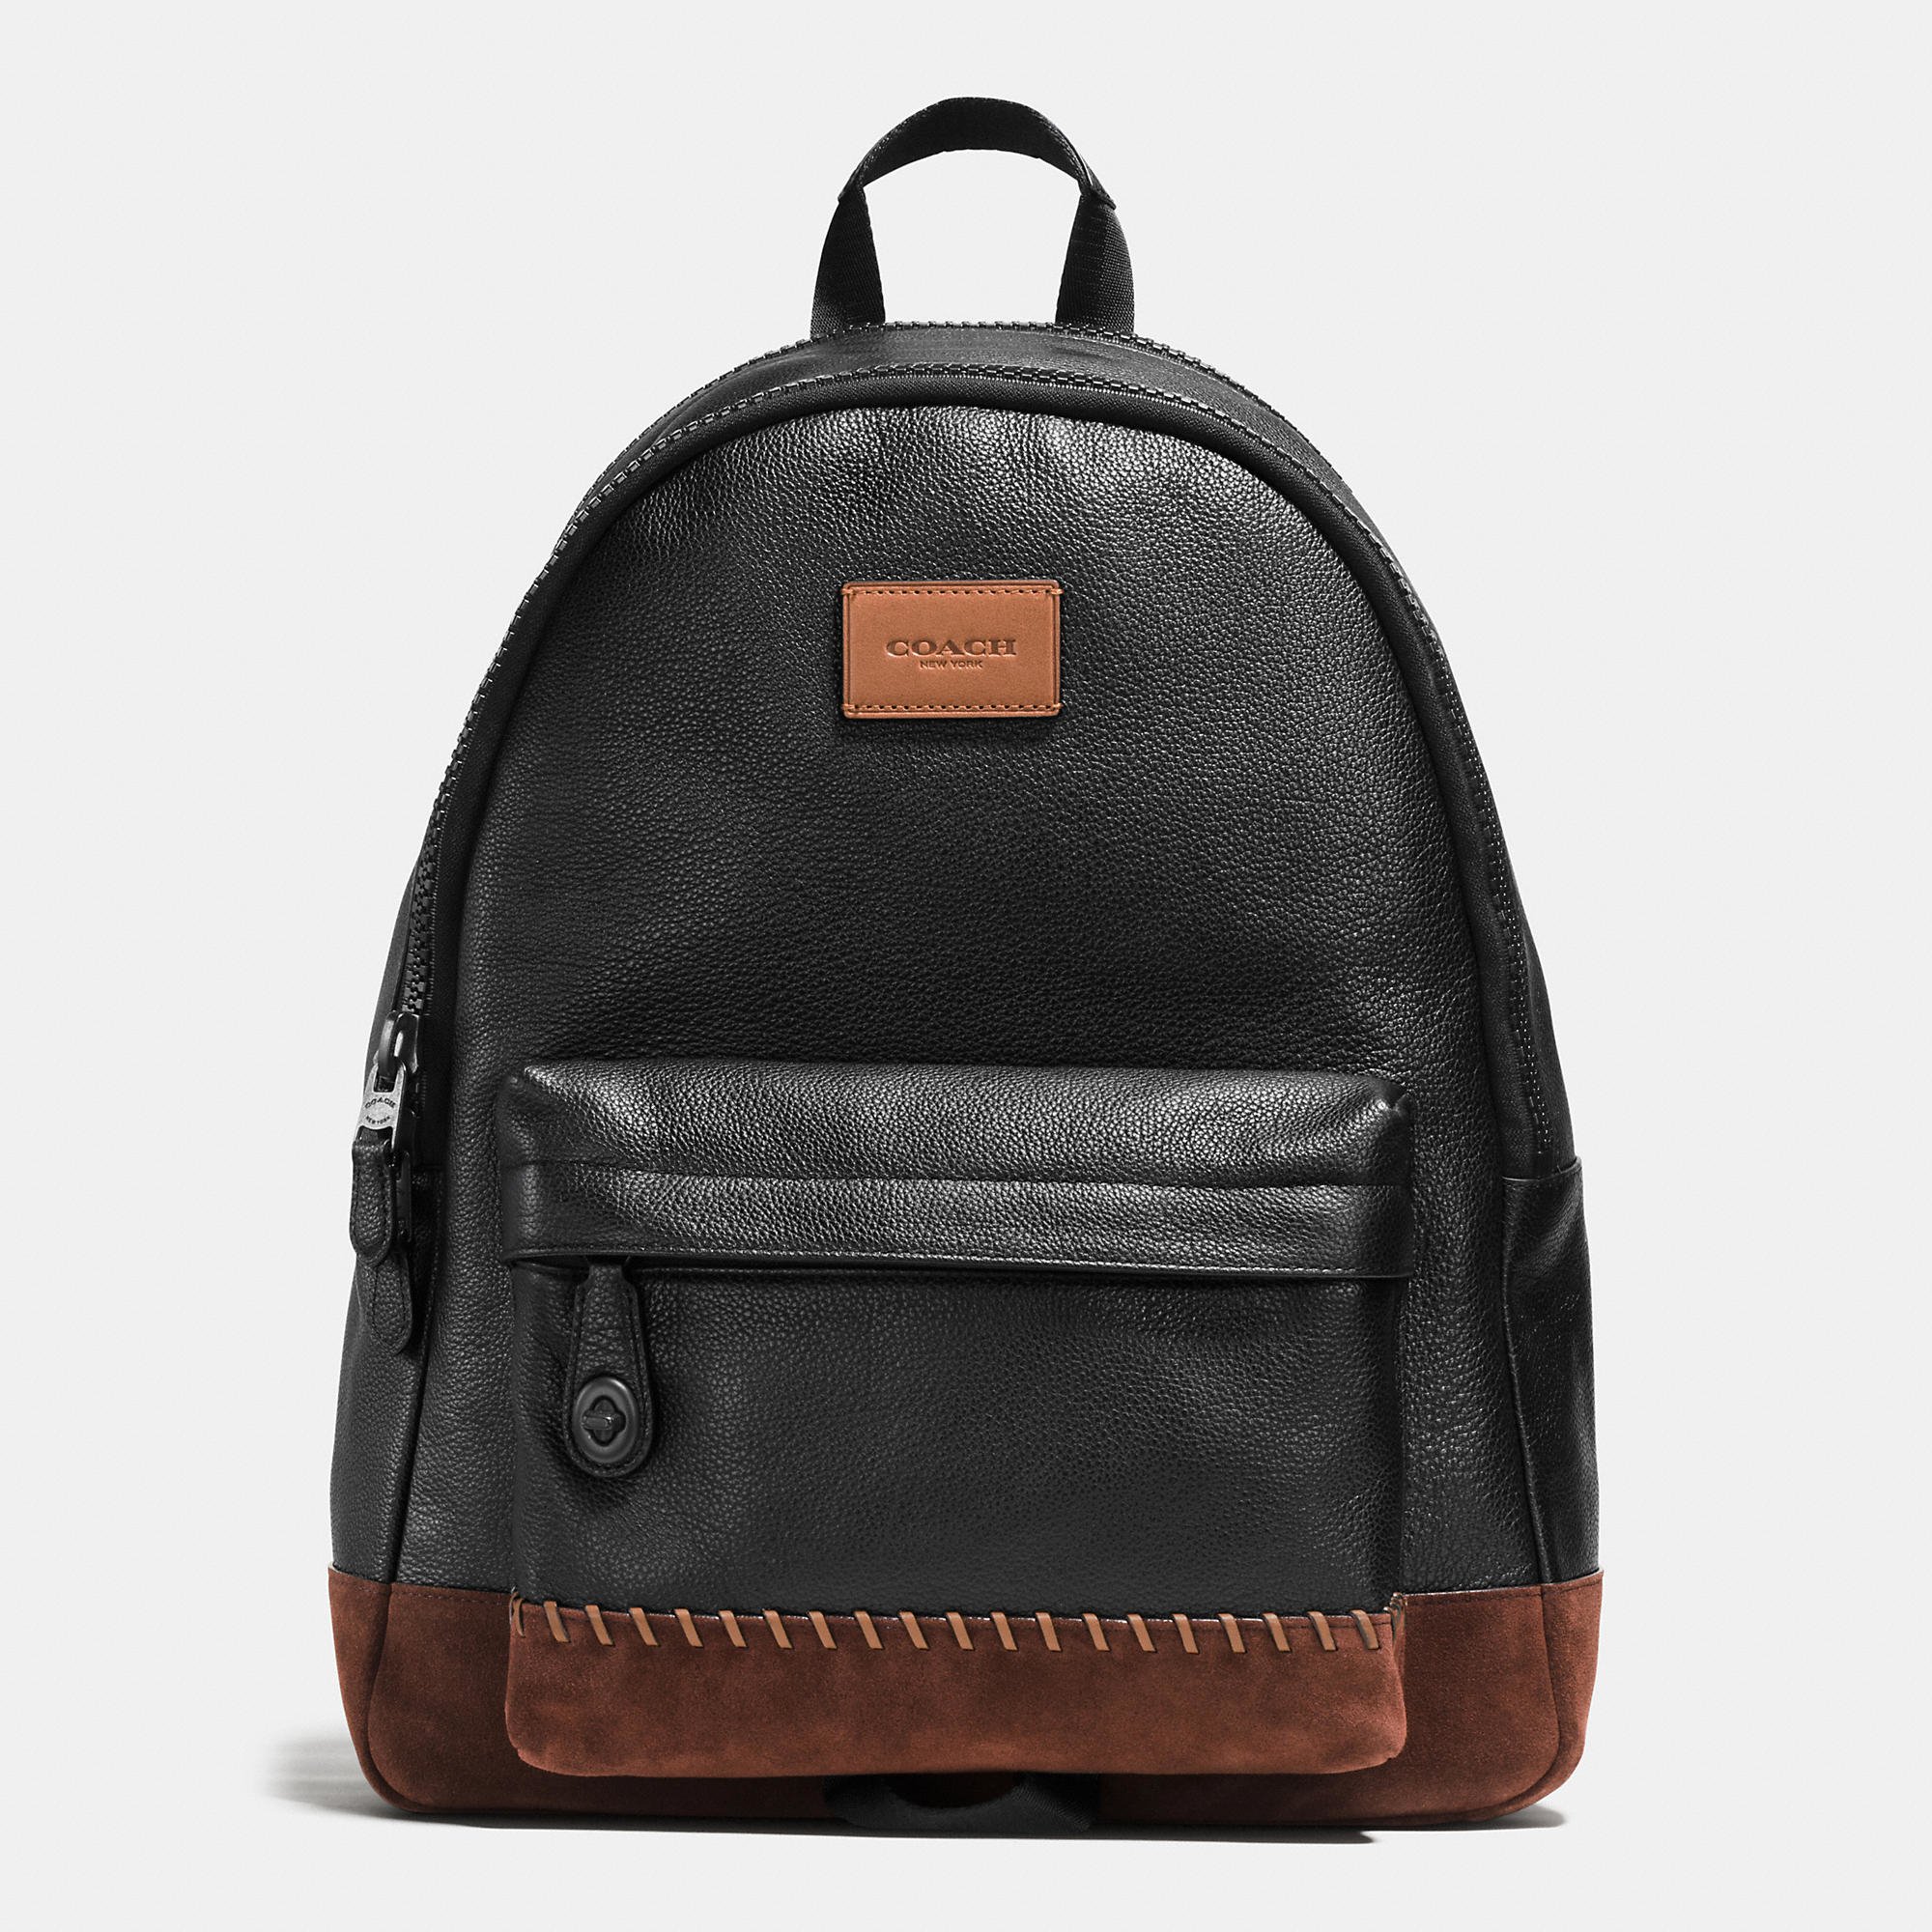 COACH Modern Varsity Campus Backpack In Pebble Leather in Black ...